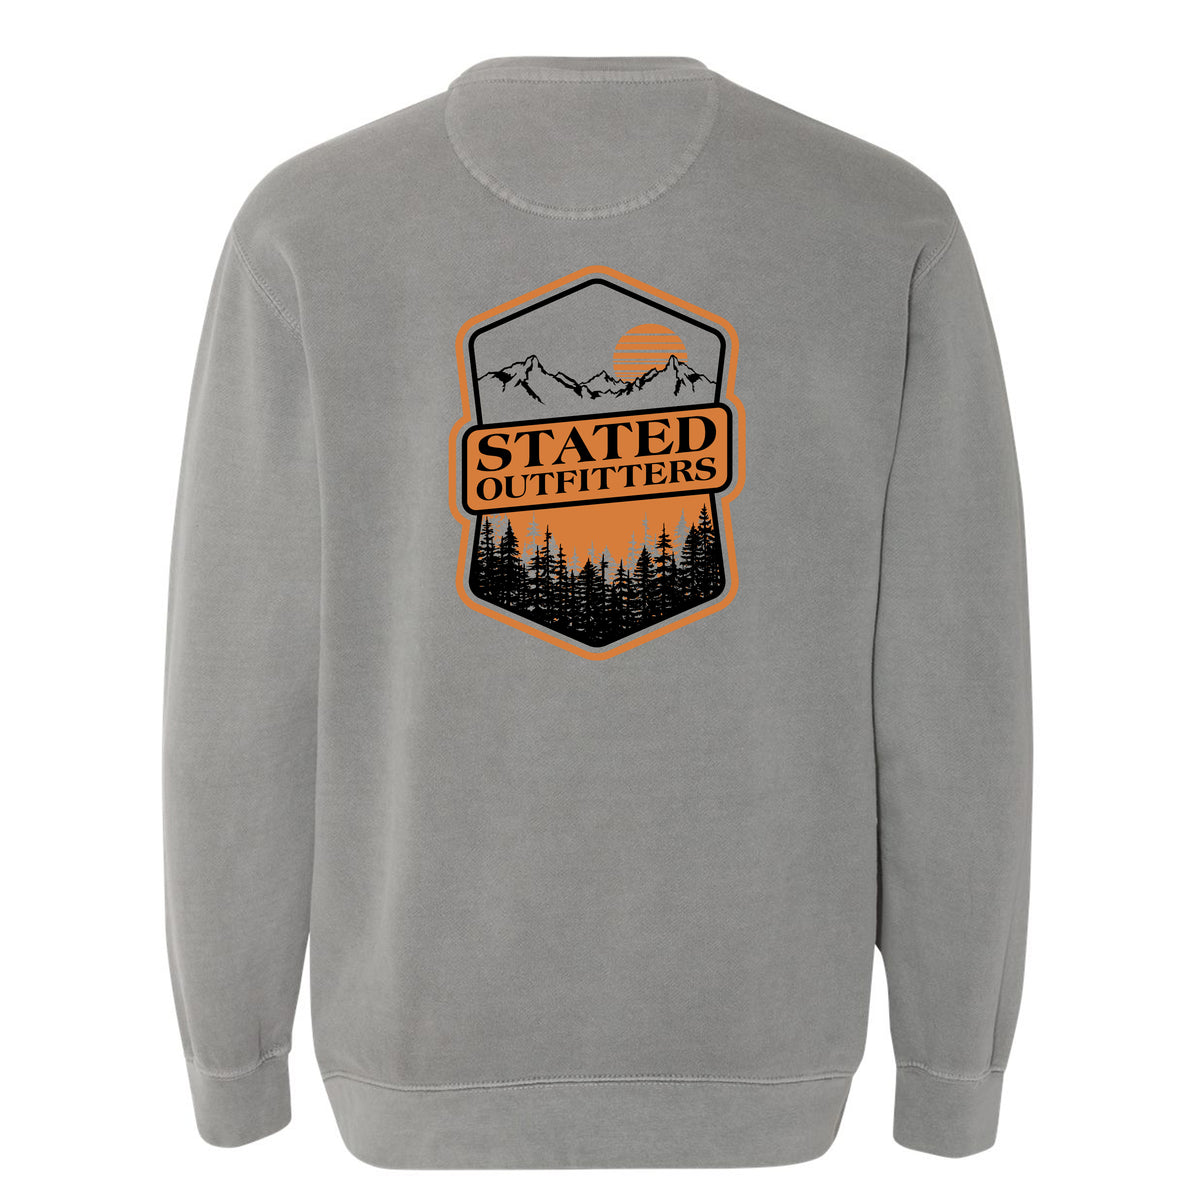 Stated Outfitters Mountain Badge Sweatshirt